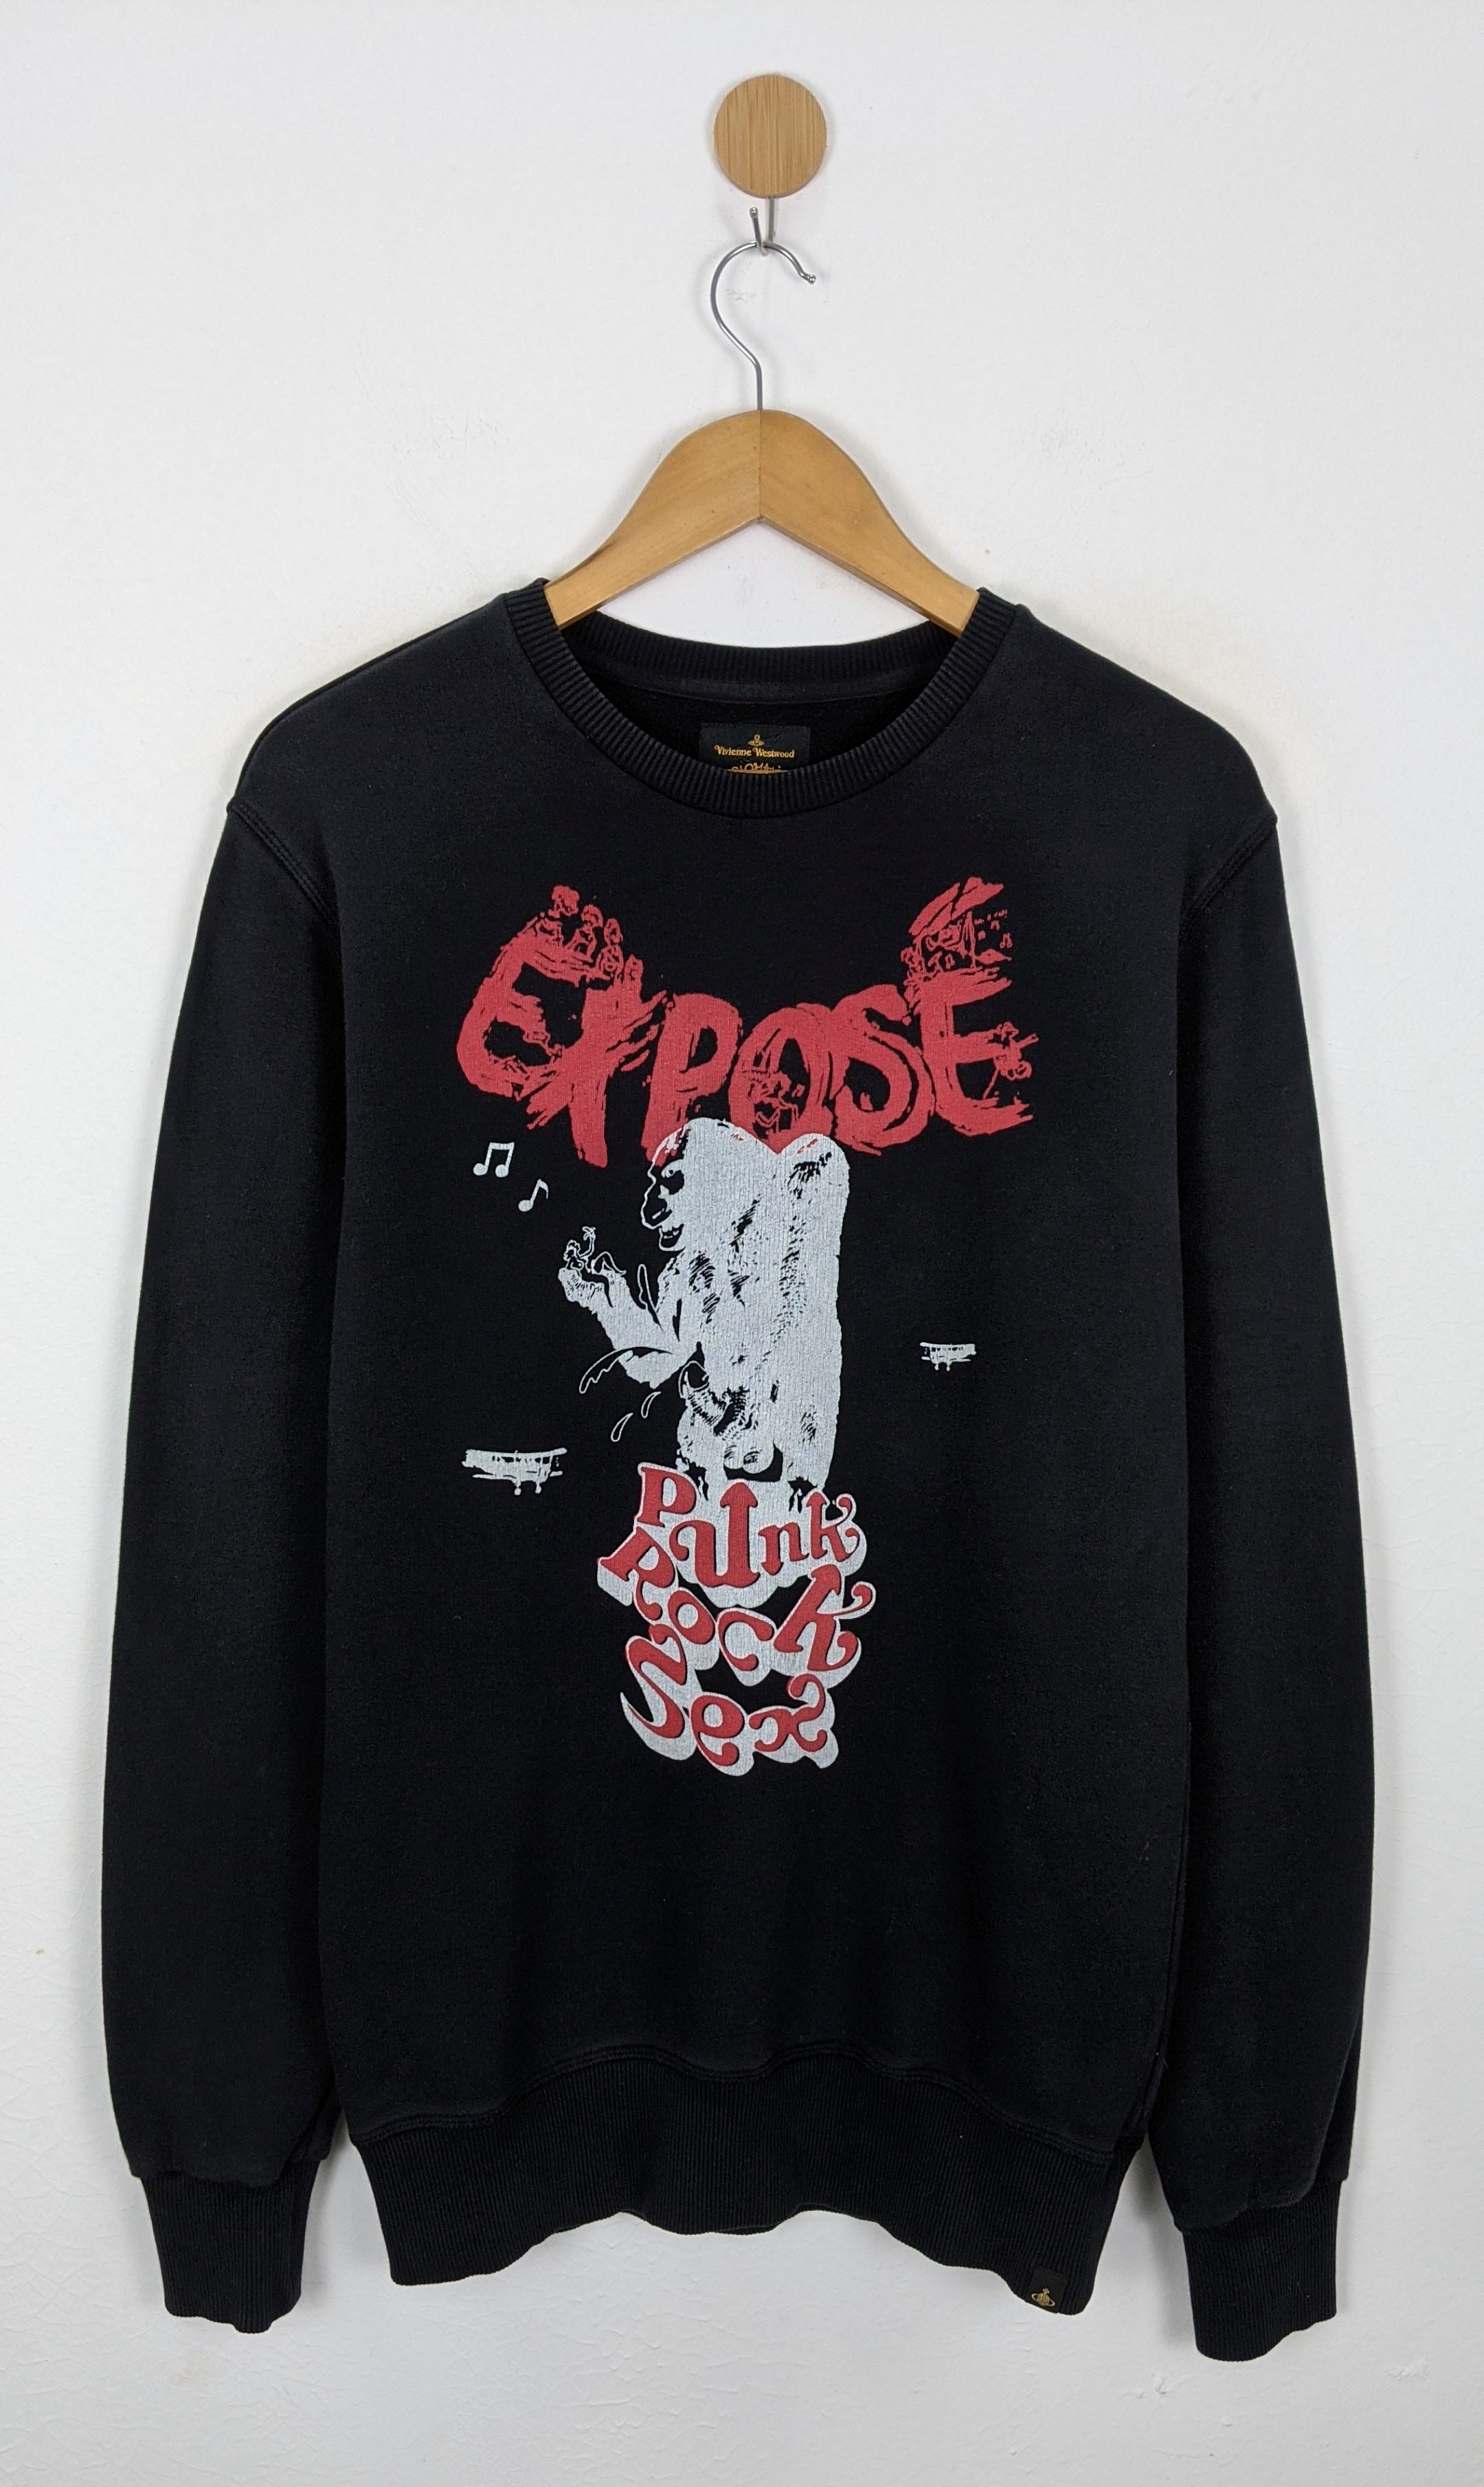 Vivienne Westwood Anglomania Expose Punk Rock Sex sweat - 1